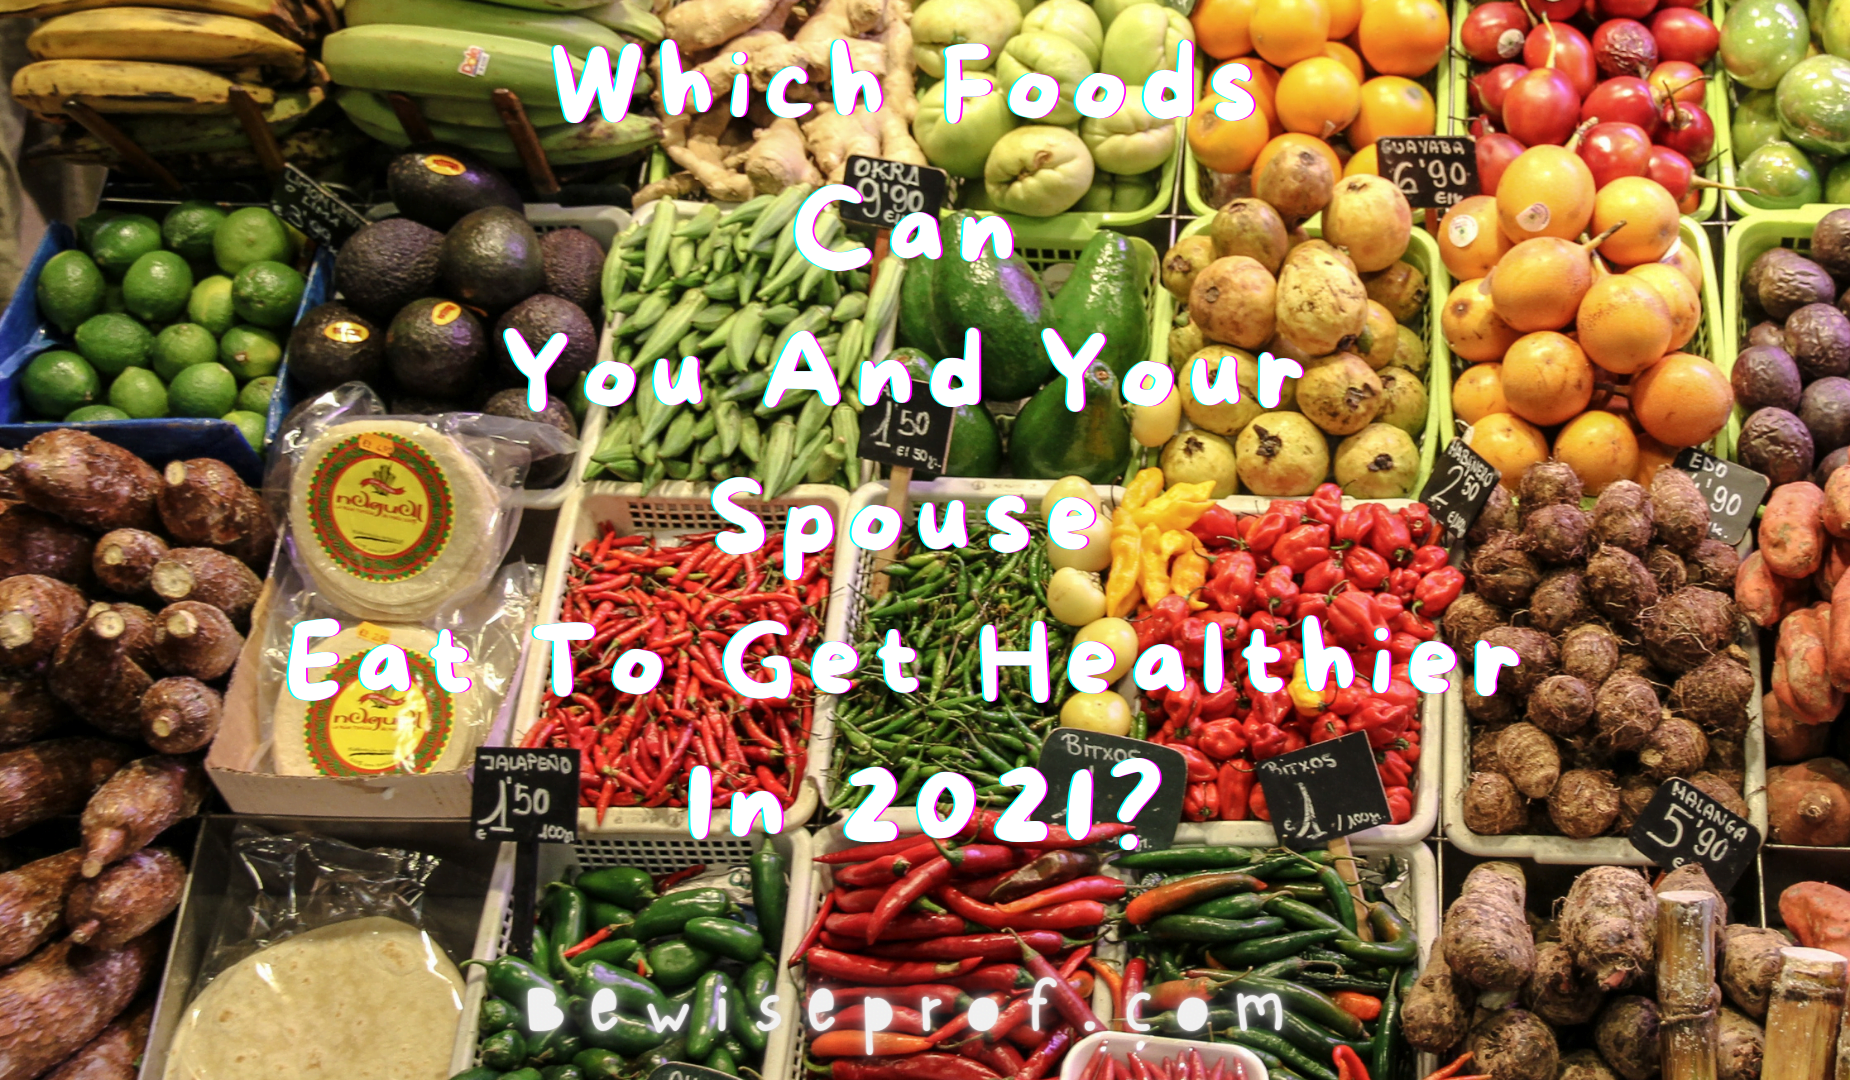 Which foods can you and your spouse eat to get healthier in 2021?